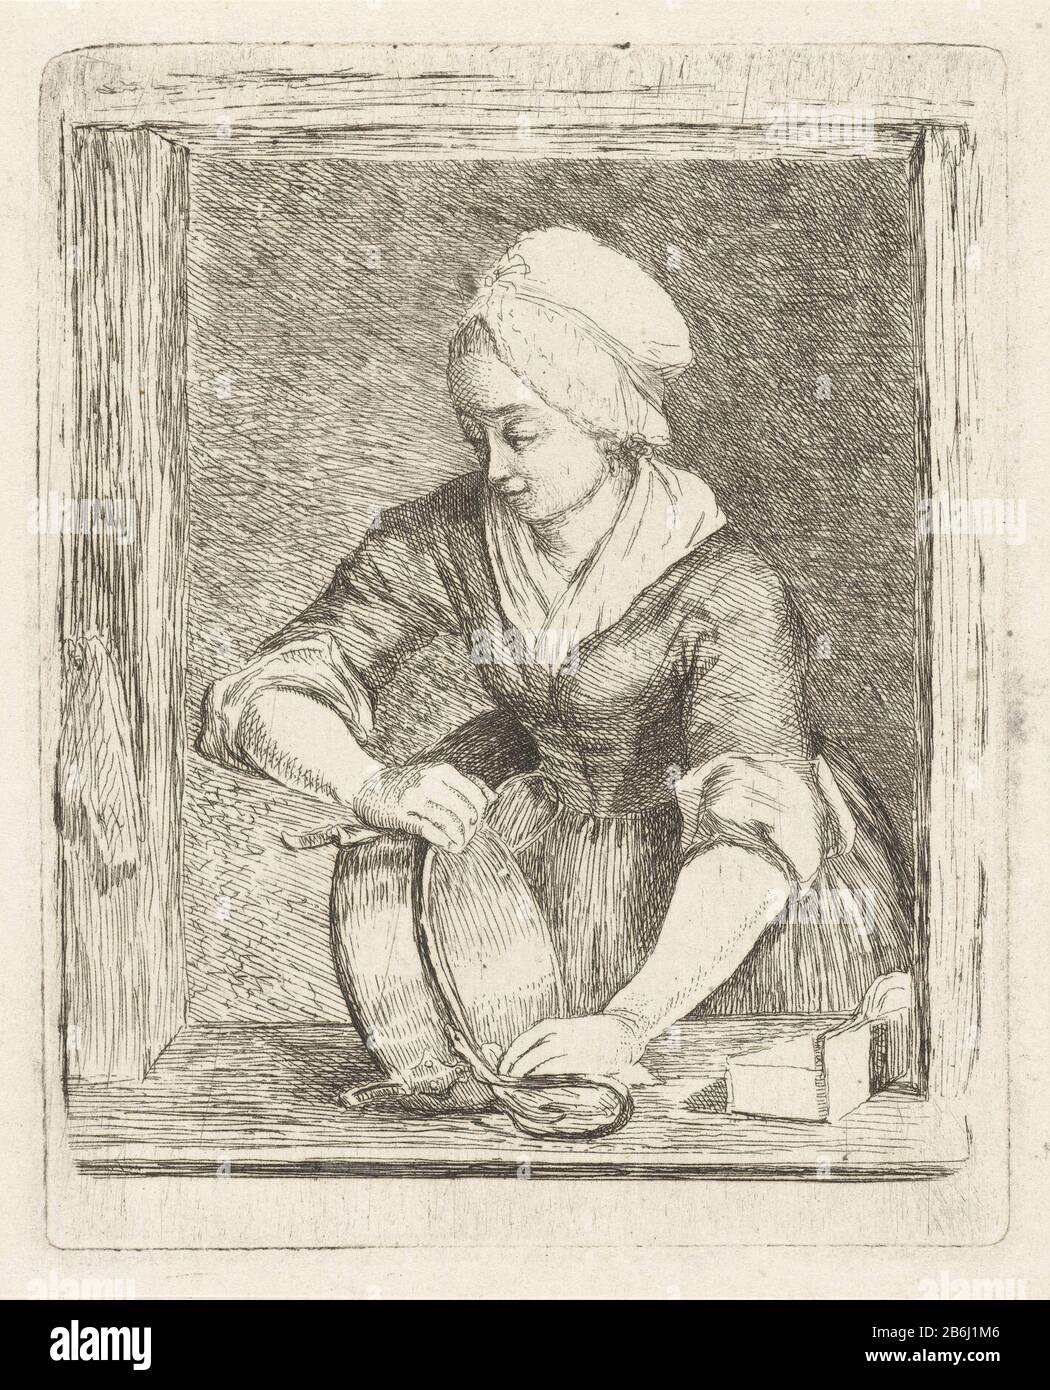 The boiler abrasive ester The boiler barn star property type: picture Item number: RP-P-1888-A-13784Catalogusreferentie: Hora Siccama 38-1 (3) Description: A young servant girl looking out the window while a boiler schuurt. Manufacturer : printmaker: Louis Bernard Coclersnaar painting: Louis Bernard CoclersPlaats manufacture: Leiden Date: 1780 Physical features: etching material: paper Technique: etching dimensions: plate edge: h 117 mm × W 95 mm Subject: washing up Stock Photo